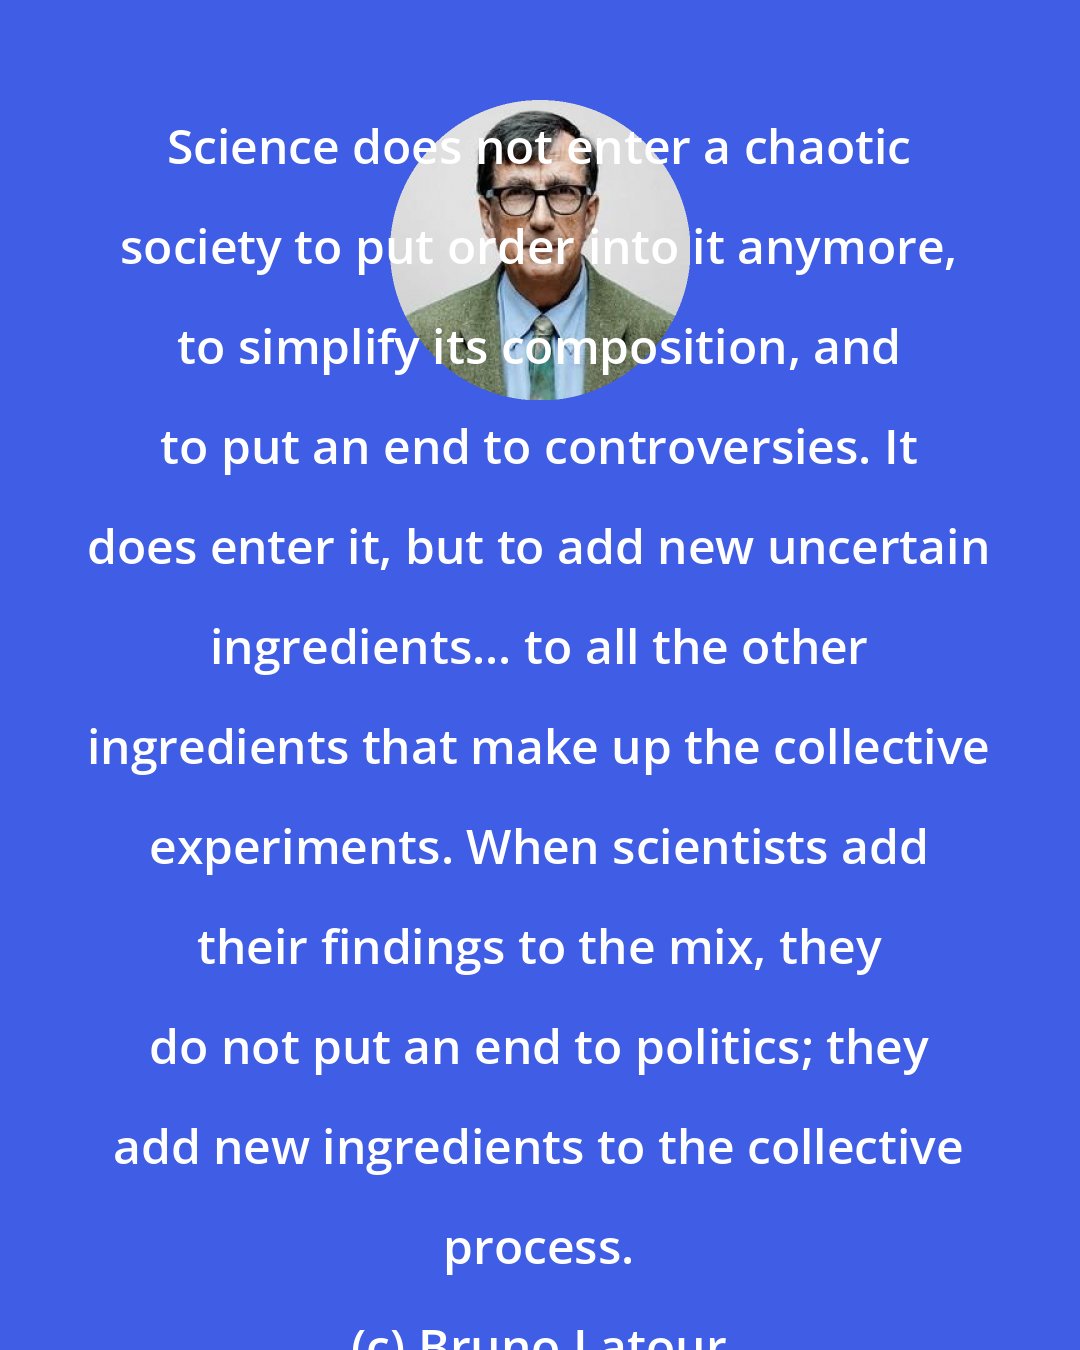 Bruno Latour: Science does not enter a chaotic society to put order into it anymore, to simplify its composition, and to put an end to controversies. It does enter it, but to add new uncertain ingredients... to all the other ingredients that make up the collective experiments. When scientists add their findings to the mix, they do not put an end to politics; they add new ingredients to the collective process.